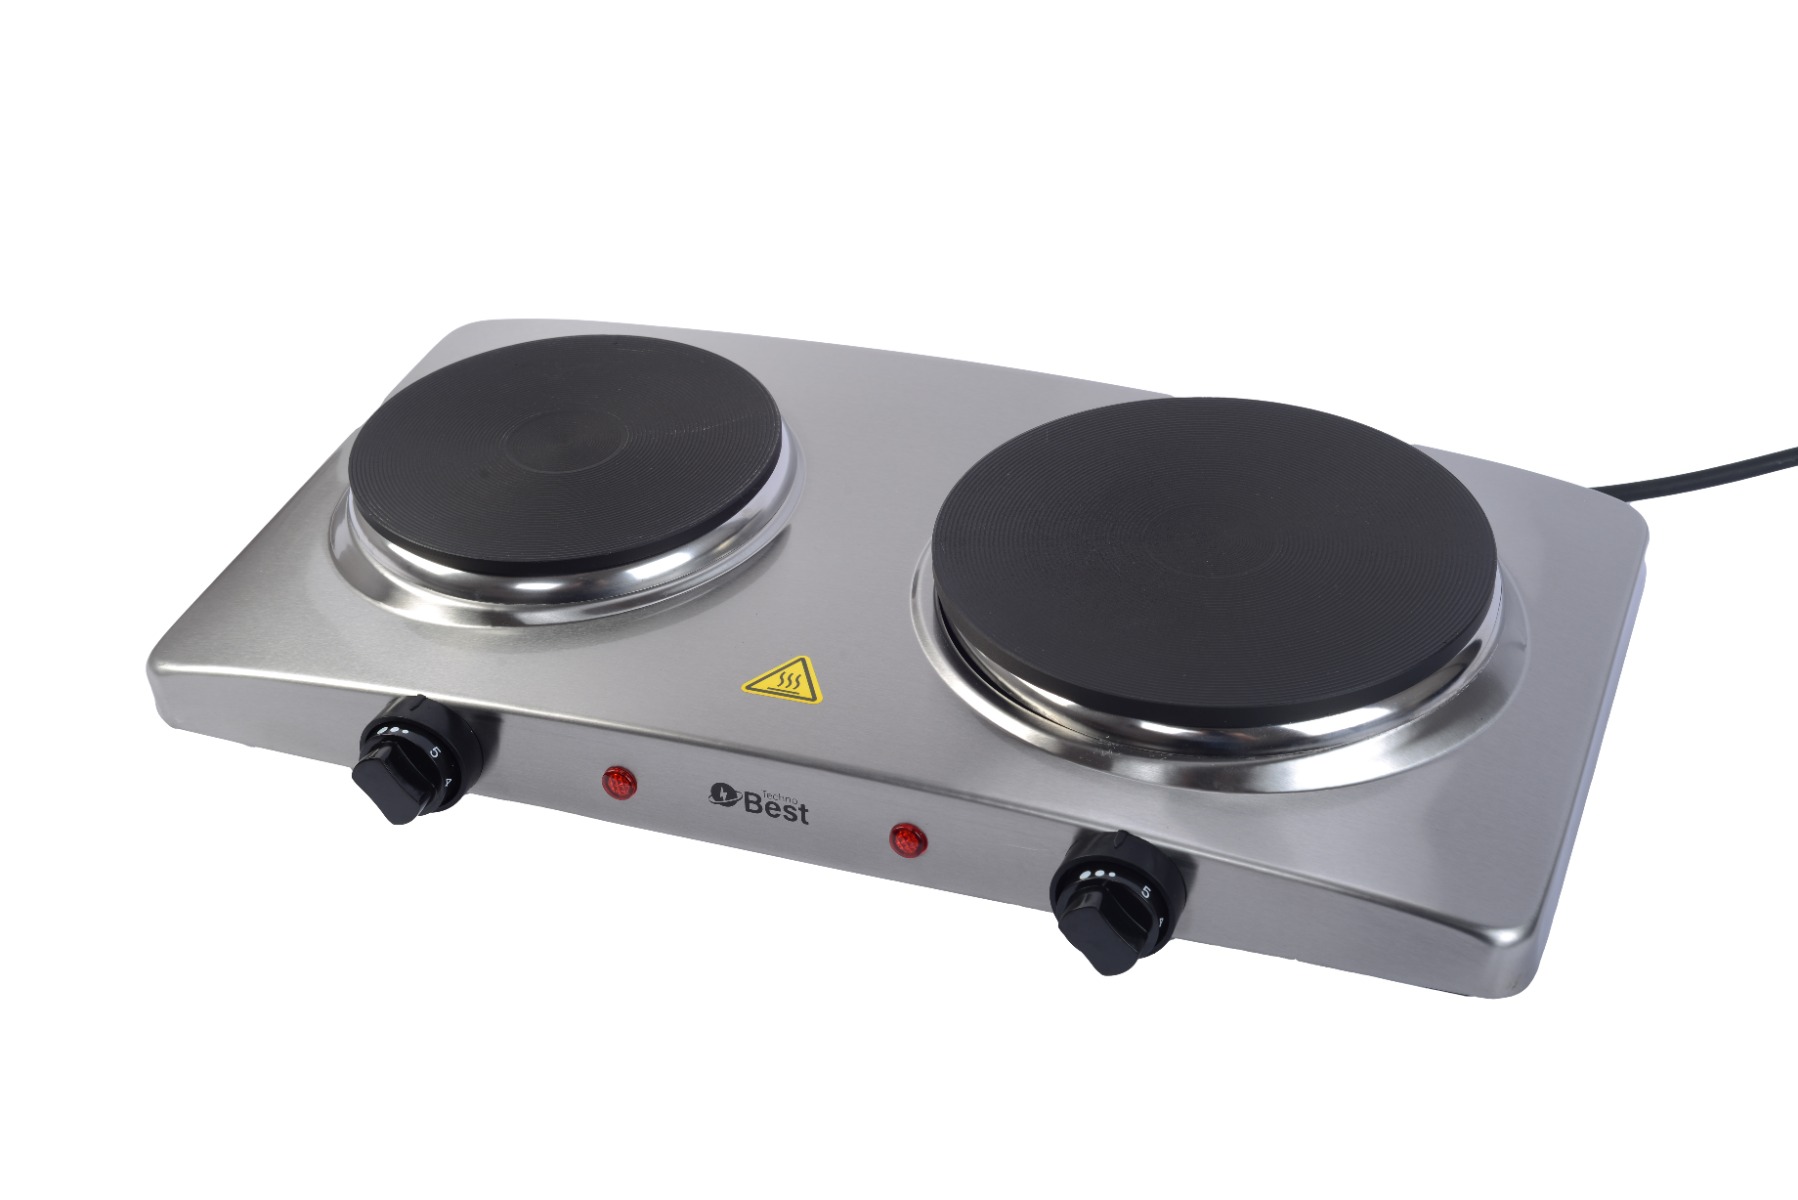 BEST Hot Plate Double 2500W, Stainless Steel - BHP-002.swsg